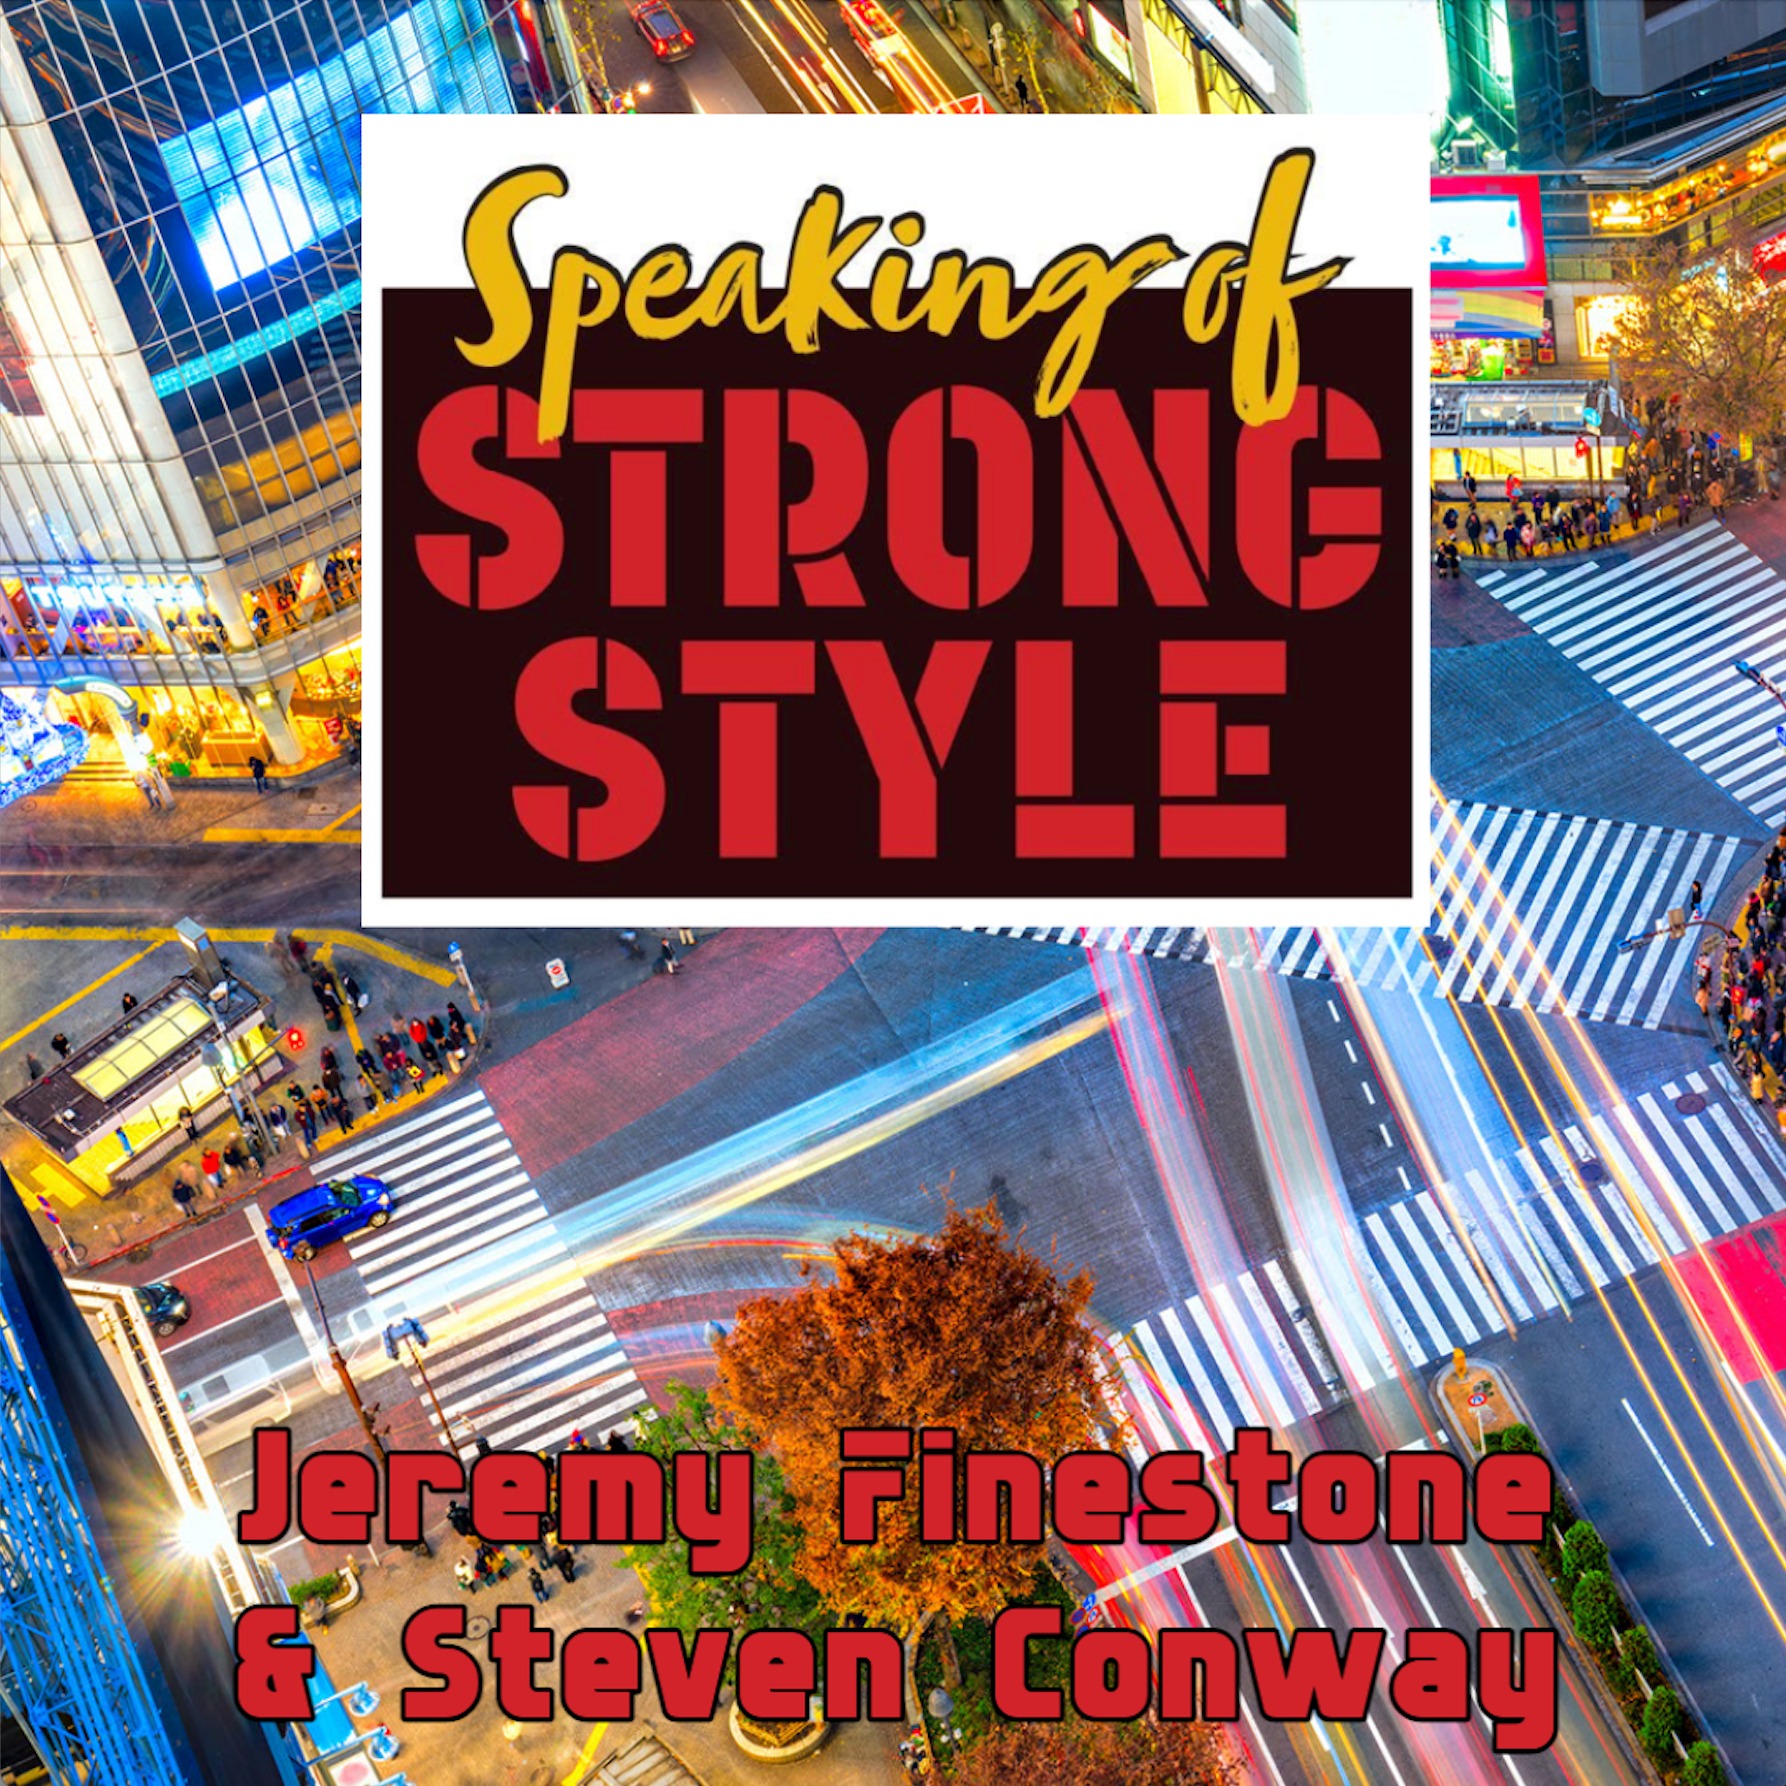 (Bonus Show) Speaking of Strong Style - Wrestle Kingdom 18 Preview with Chris Samsa